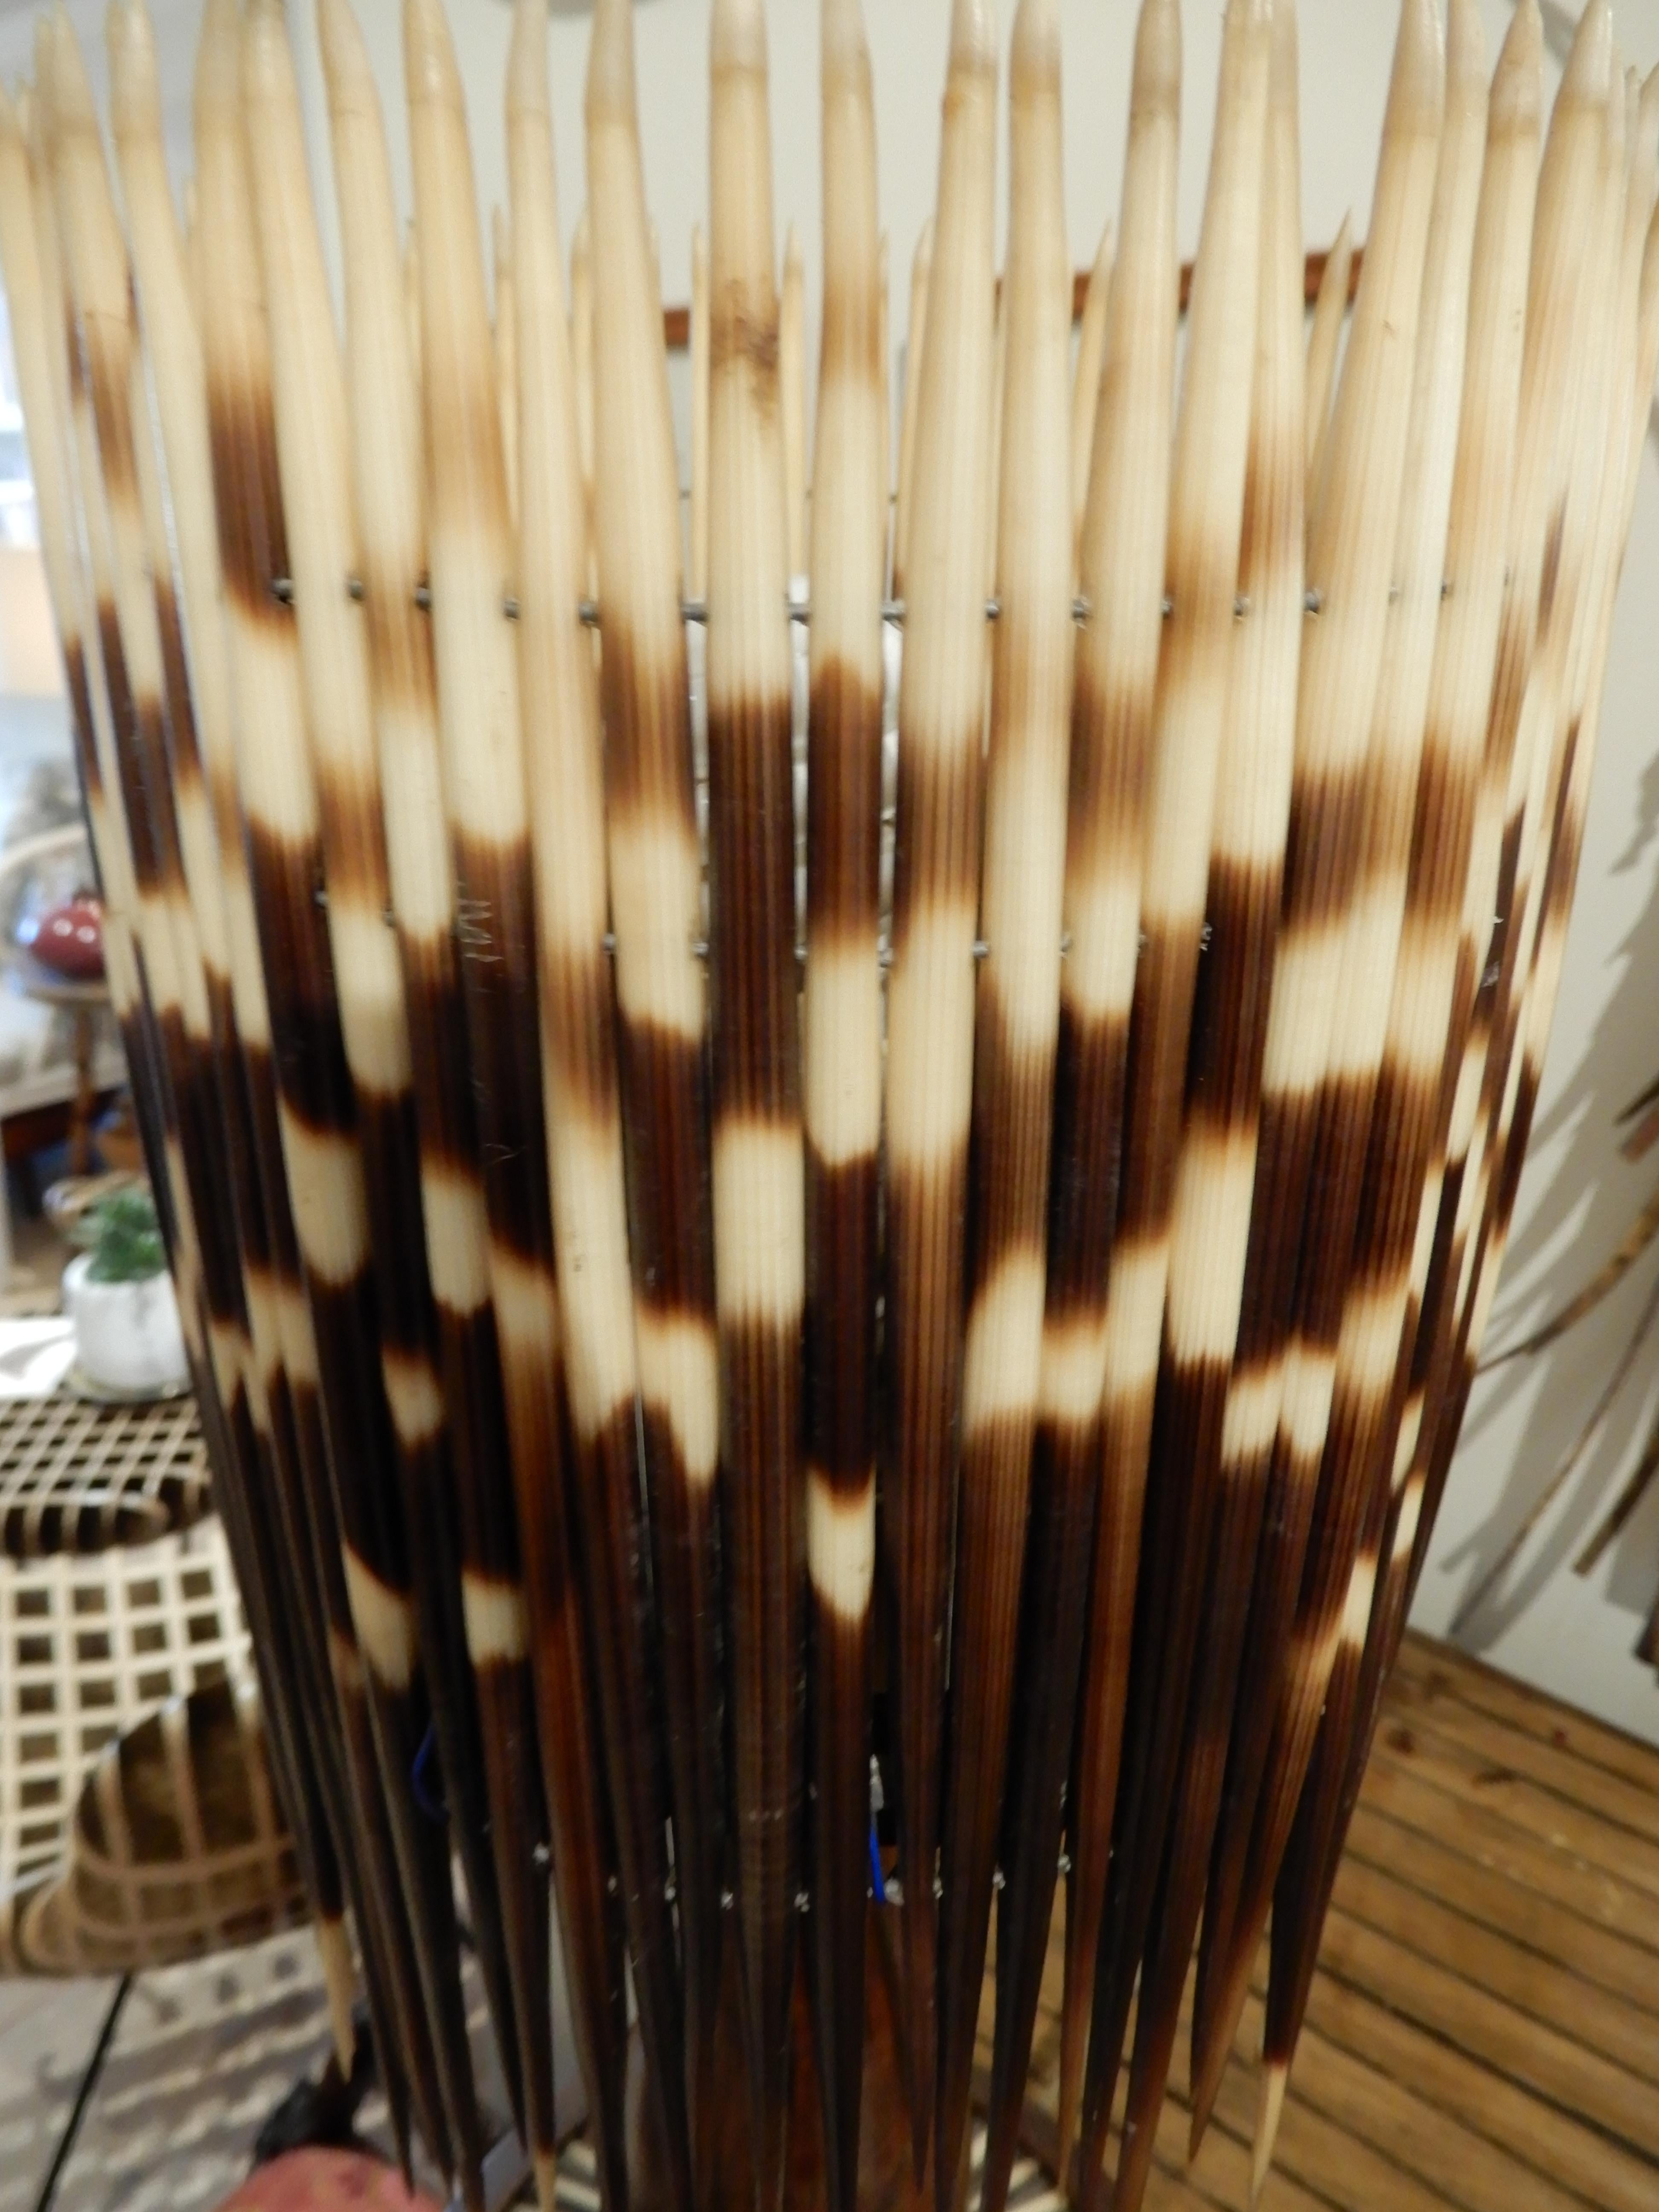 Decorating with the natural beauty of Porcupine Quills has a unique affect, the light has a warm glow through the quills.
This rare find was probably a custom made piece, with solid walnut woods, porcupine quill inlays and quill shade.